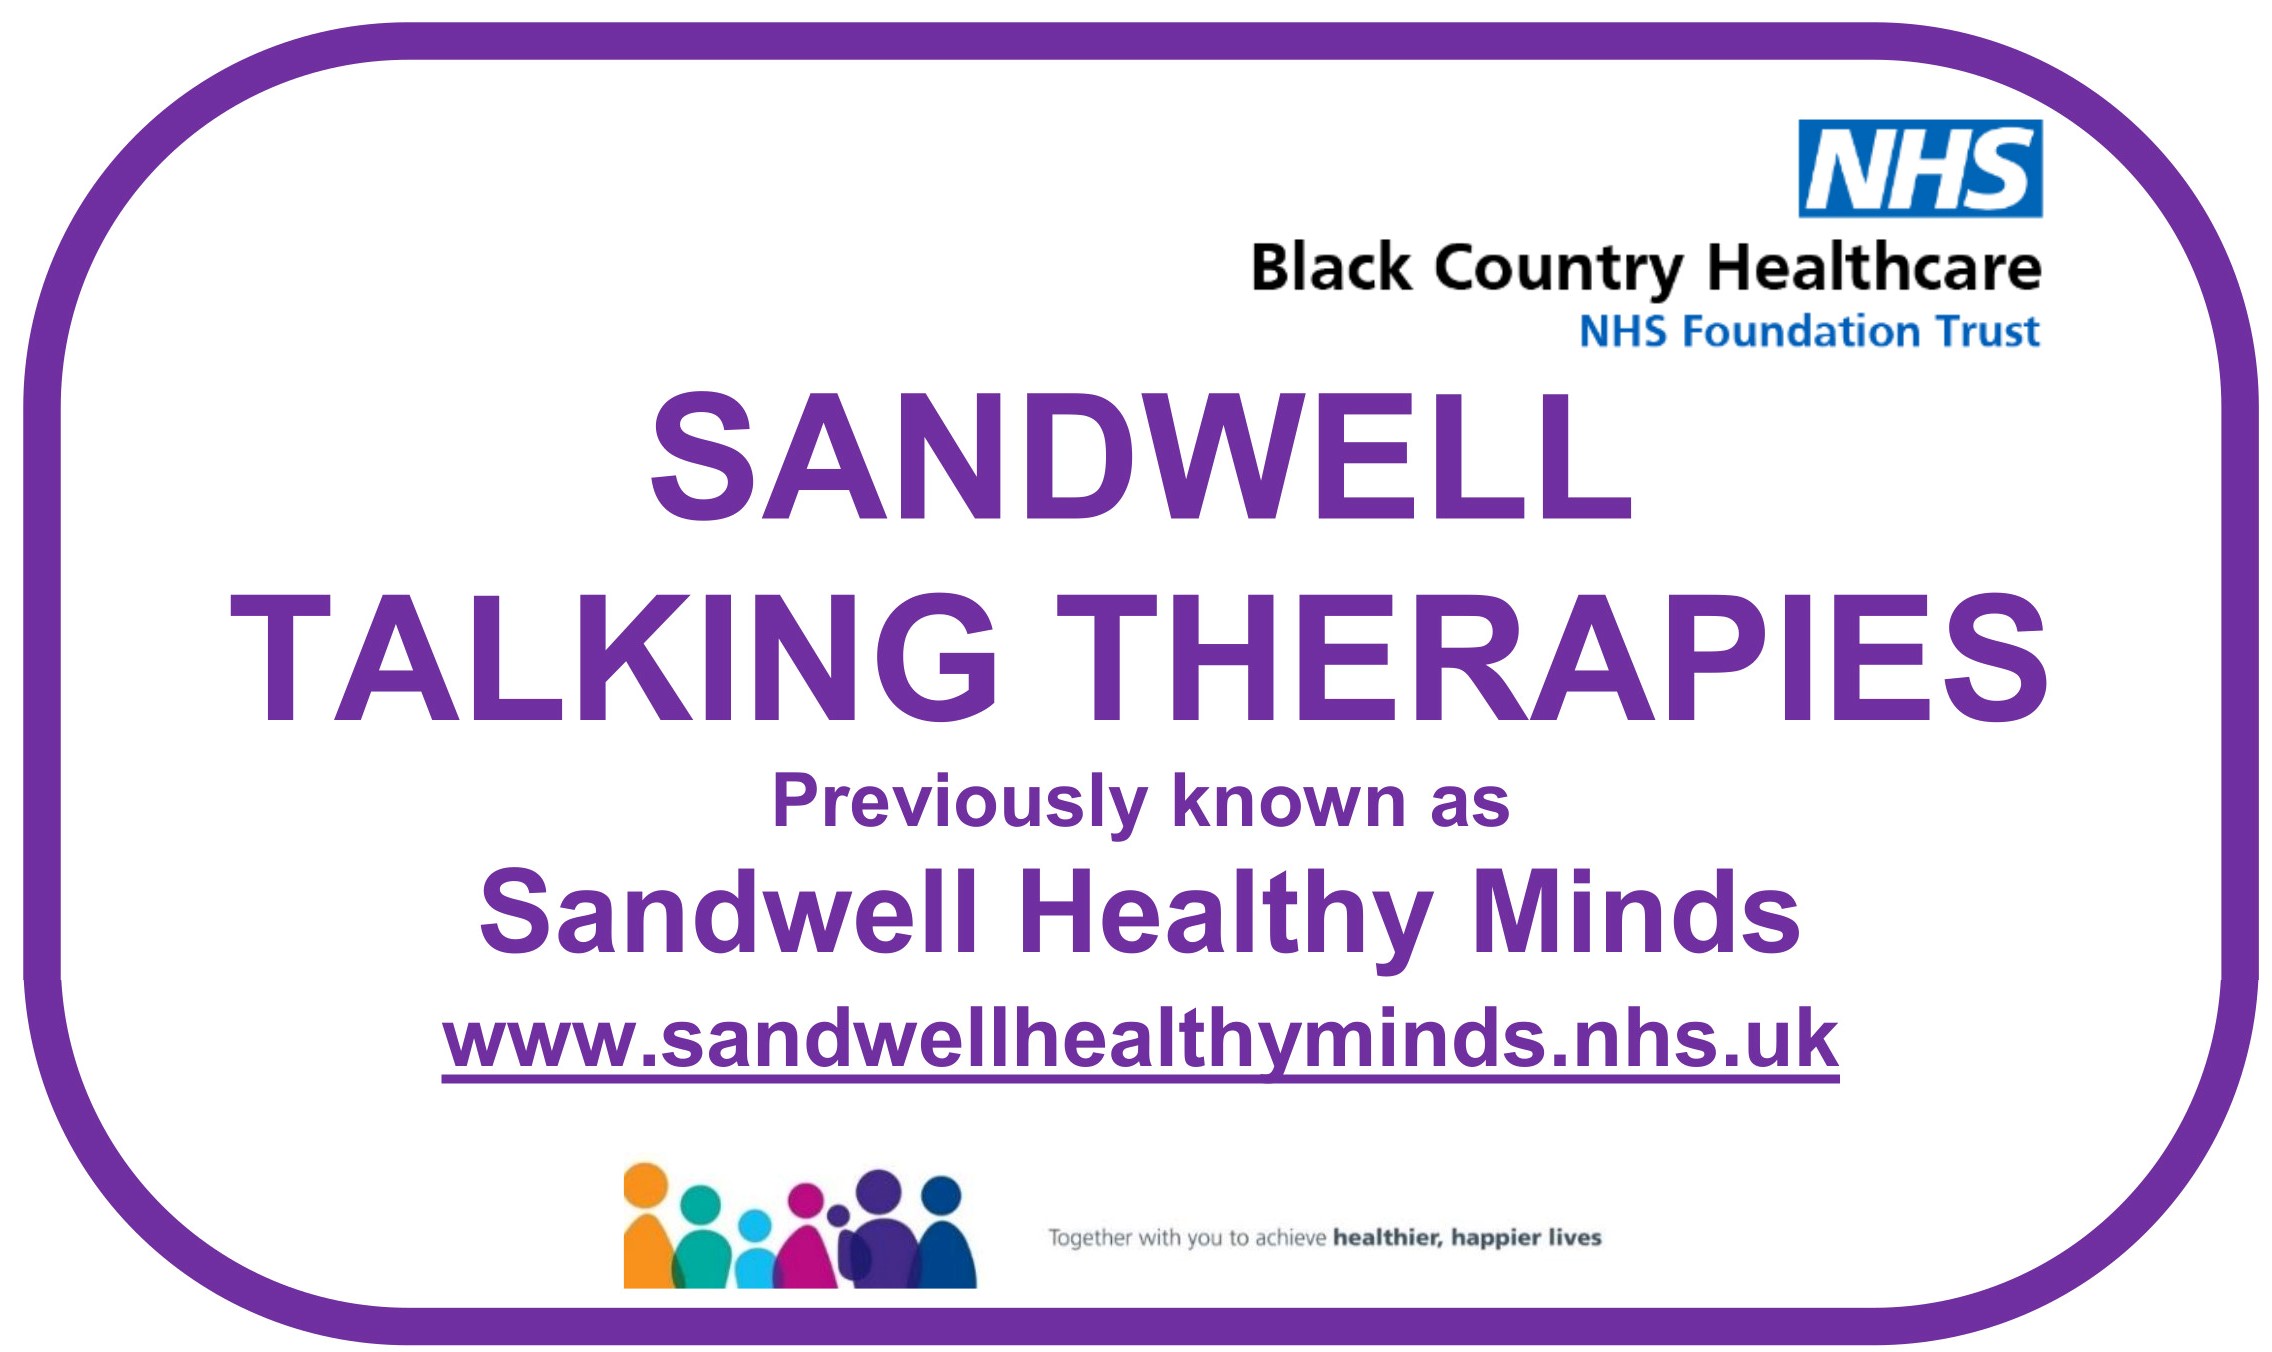 Graphic displaying "Sandwell Talking Therapies previously known as Sandwell Healthy Minds www.sandwellhealthyminds.nhs.uk